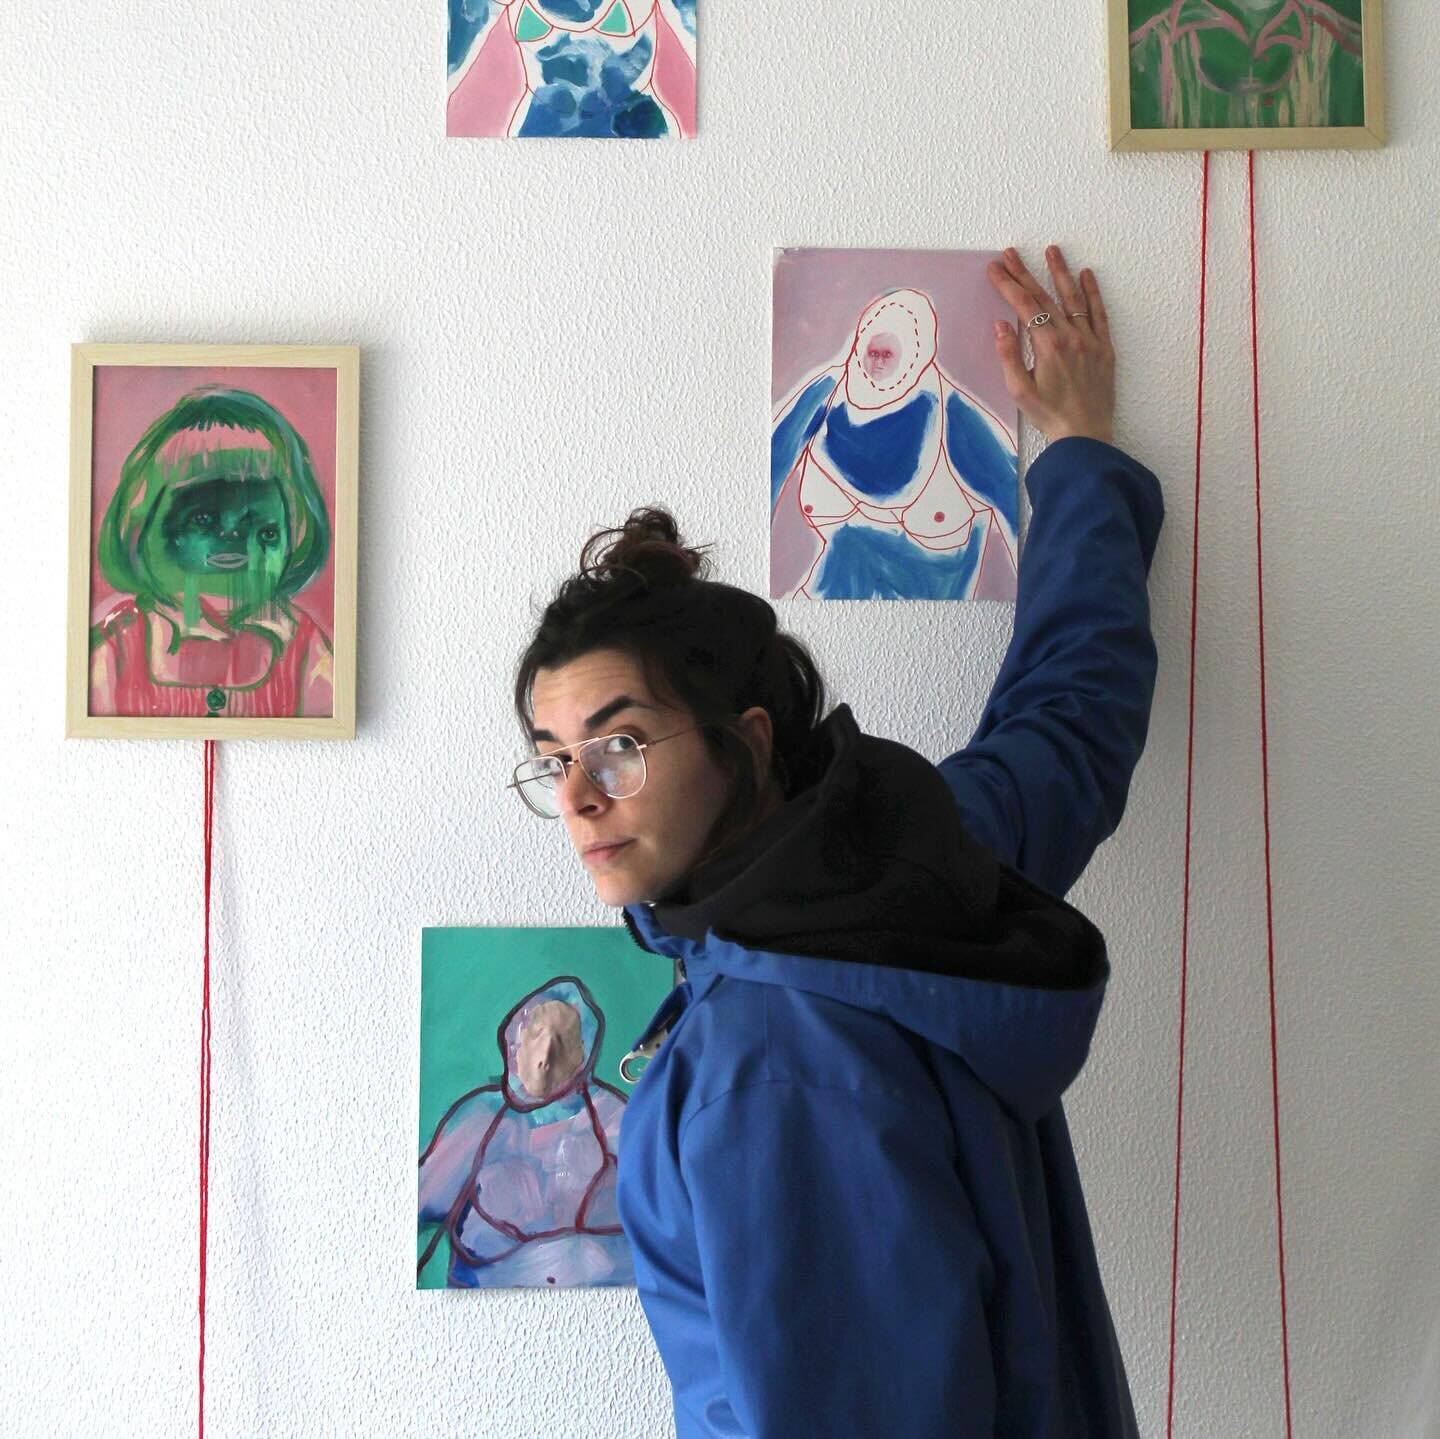 PADA welcomes Mariana Murta as part of Residency 44 March-April.

@mariana.murta

“Body, identity and authenticity are recurring themes in my paintings and installations. My practice focuses on expressive interdisciplinary self portraits t